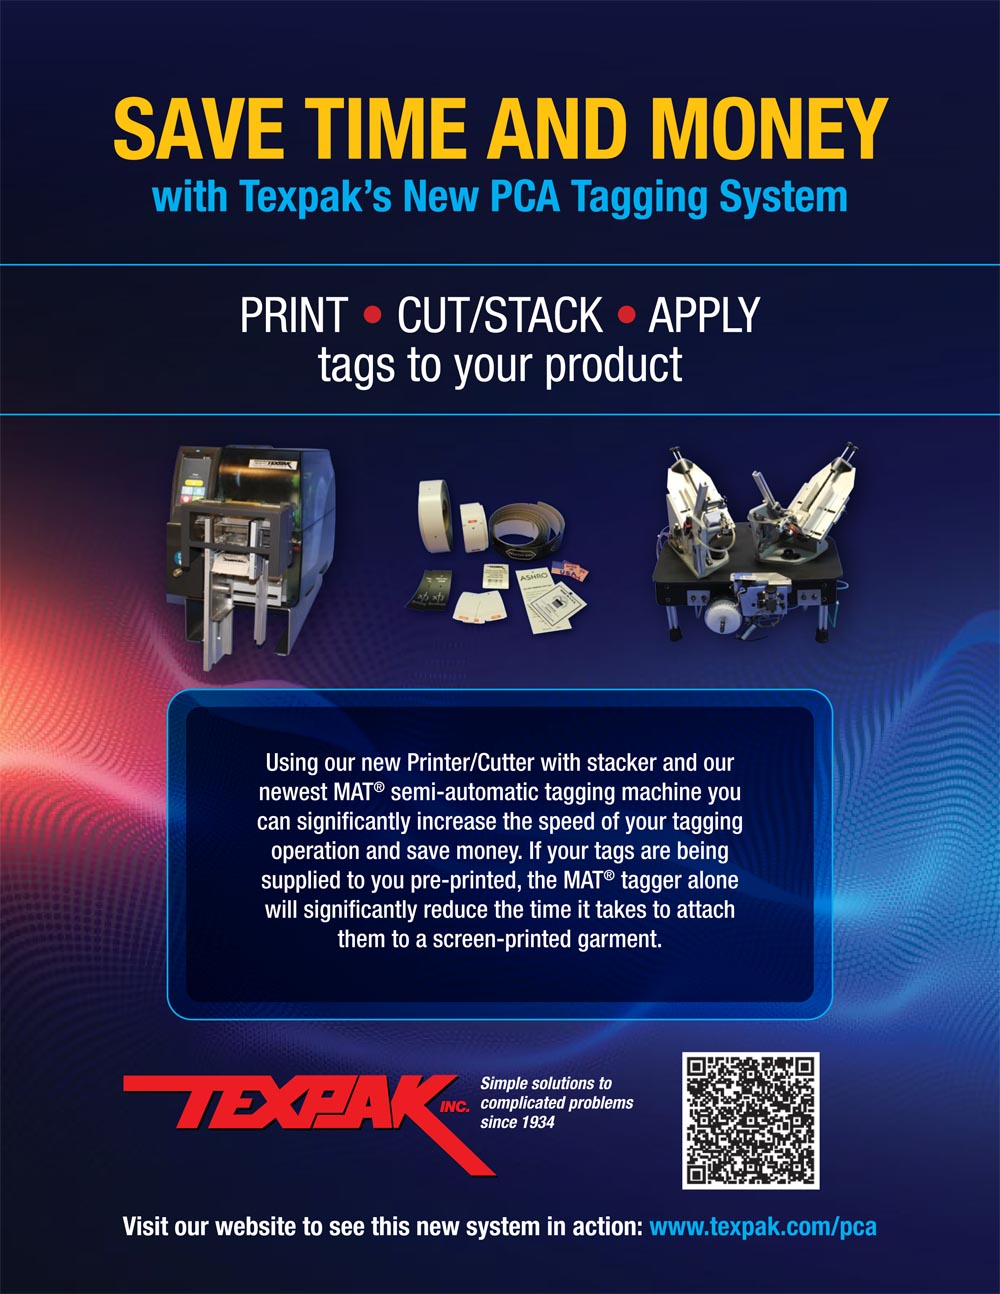 PCA Tagging System from Texpak